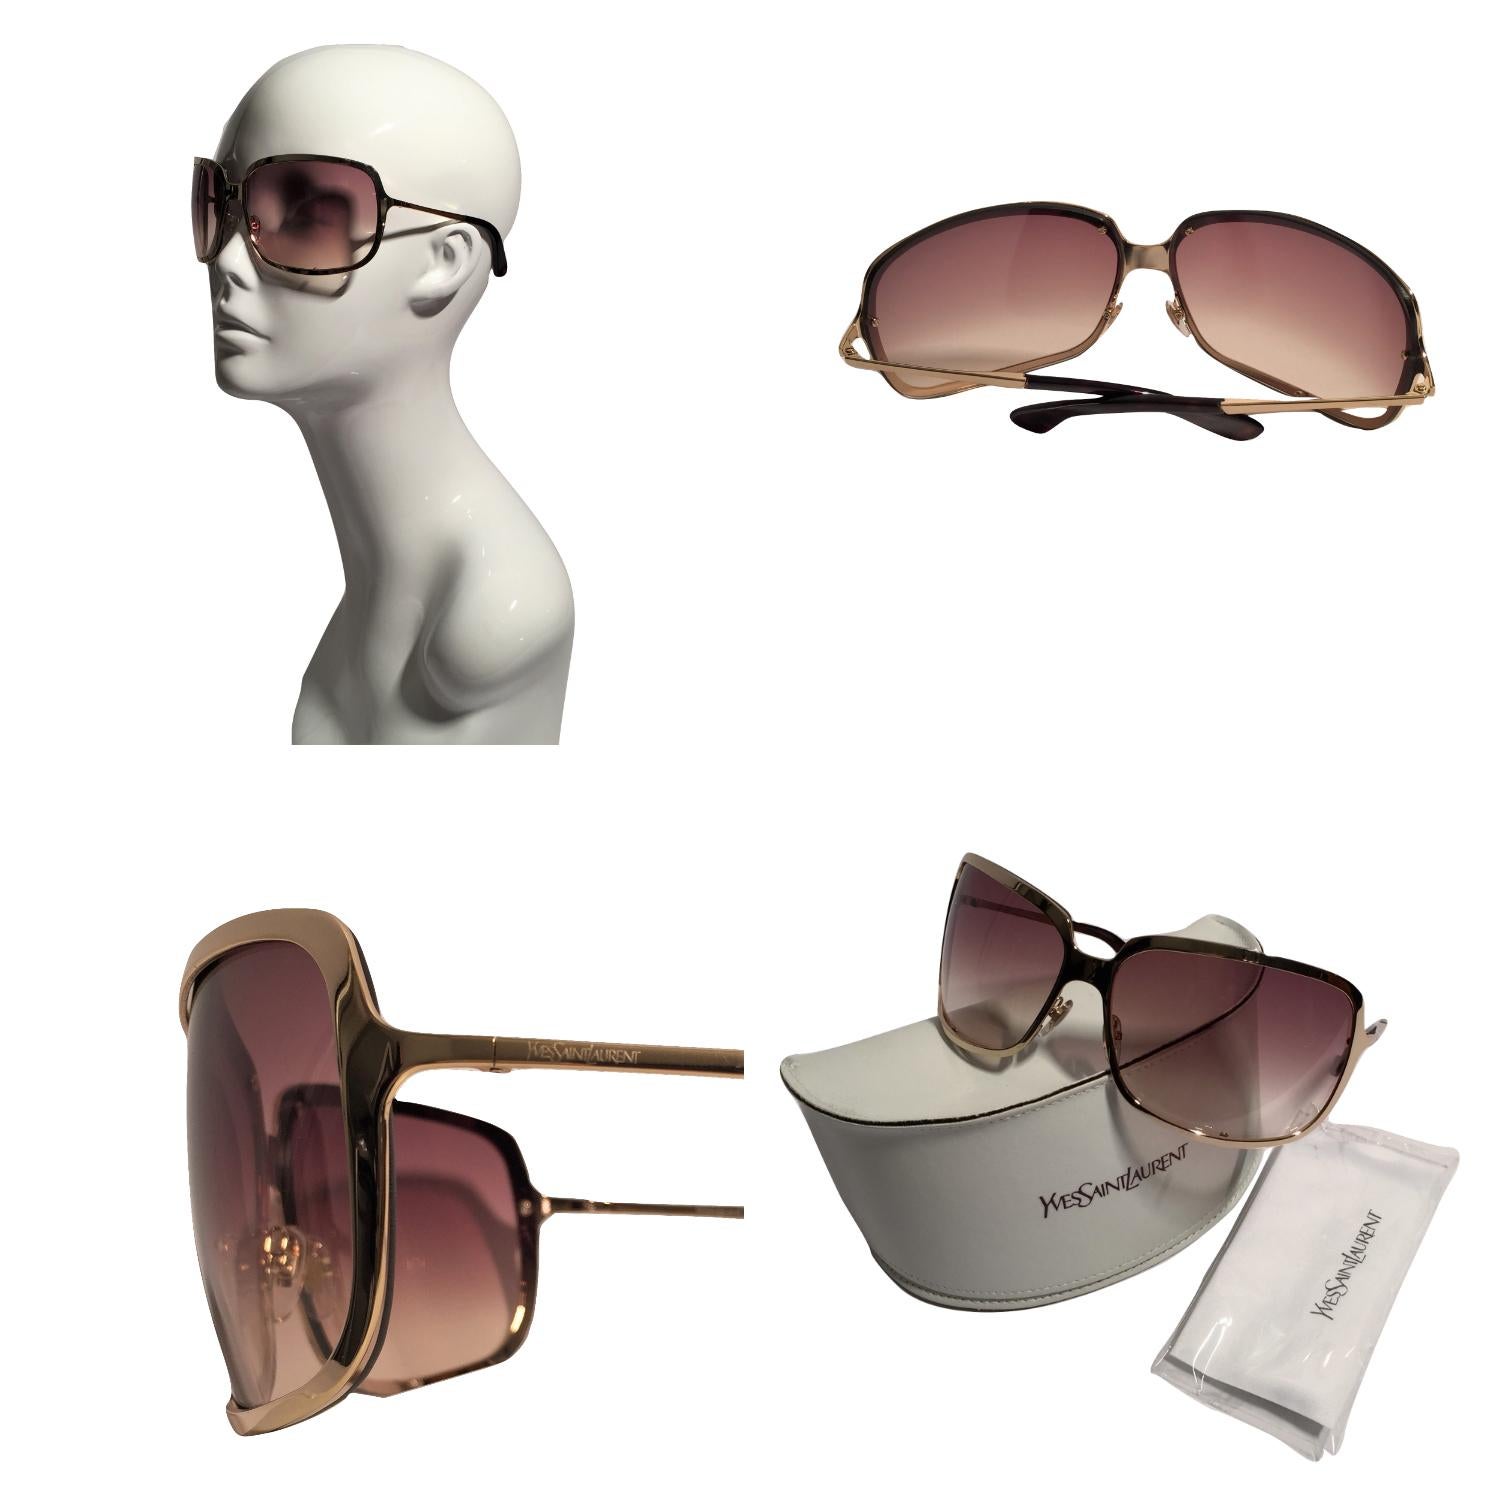 Yves Saint Laurent Sunglasses
Brand New
*Stunning in Gold Wrap
* Rose Gradient Lenses
* Super Lightweight
* Seen on MANY Stars
* Gold Hardware
* Made in Italy
* 100% UVA/UVB Protection
* Comes with Case, Cleaning Cloth & Cloth Extra Case